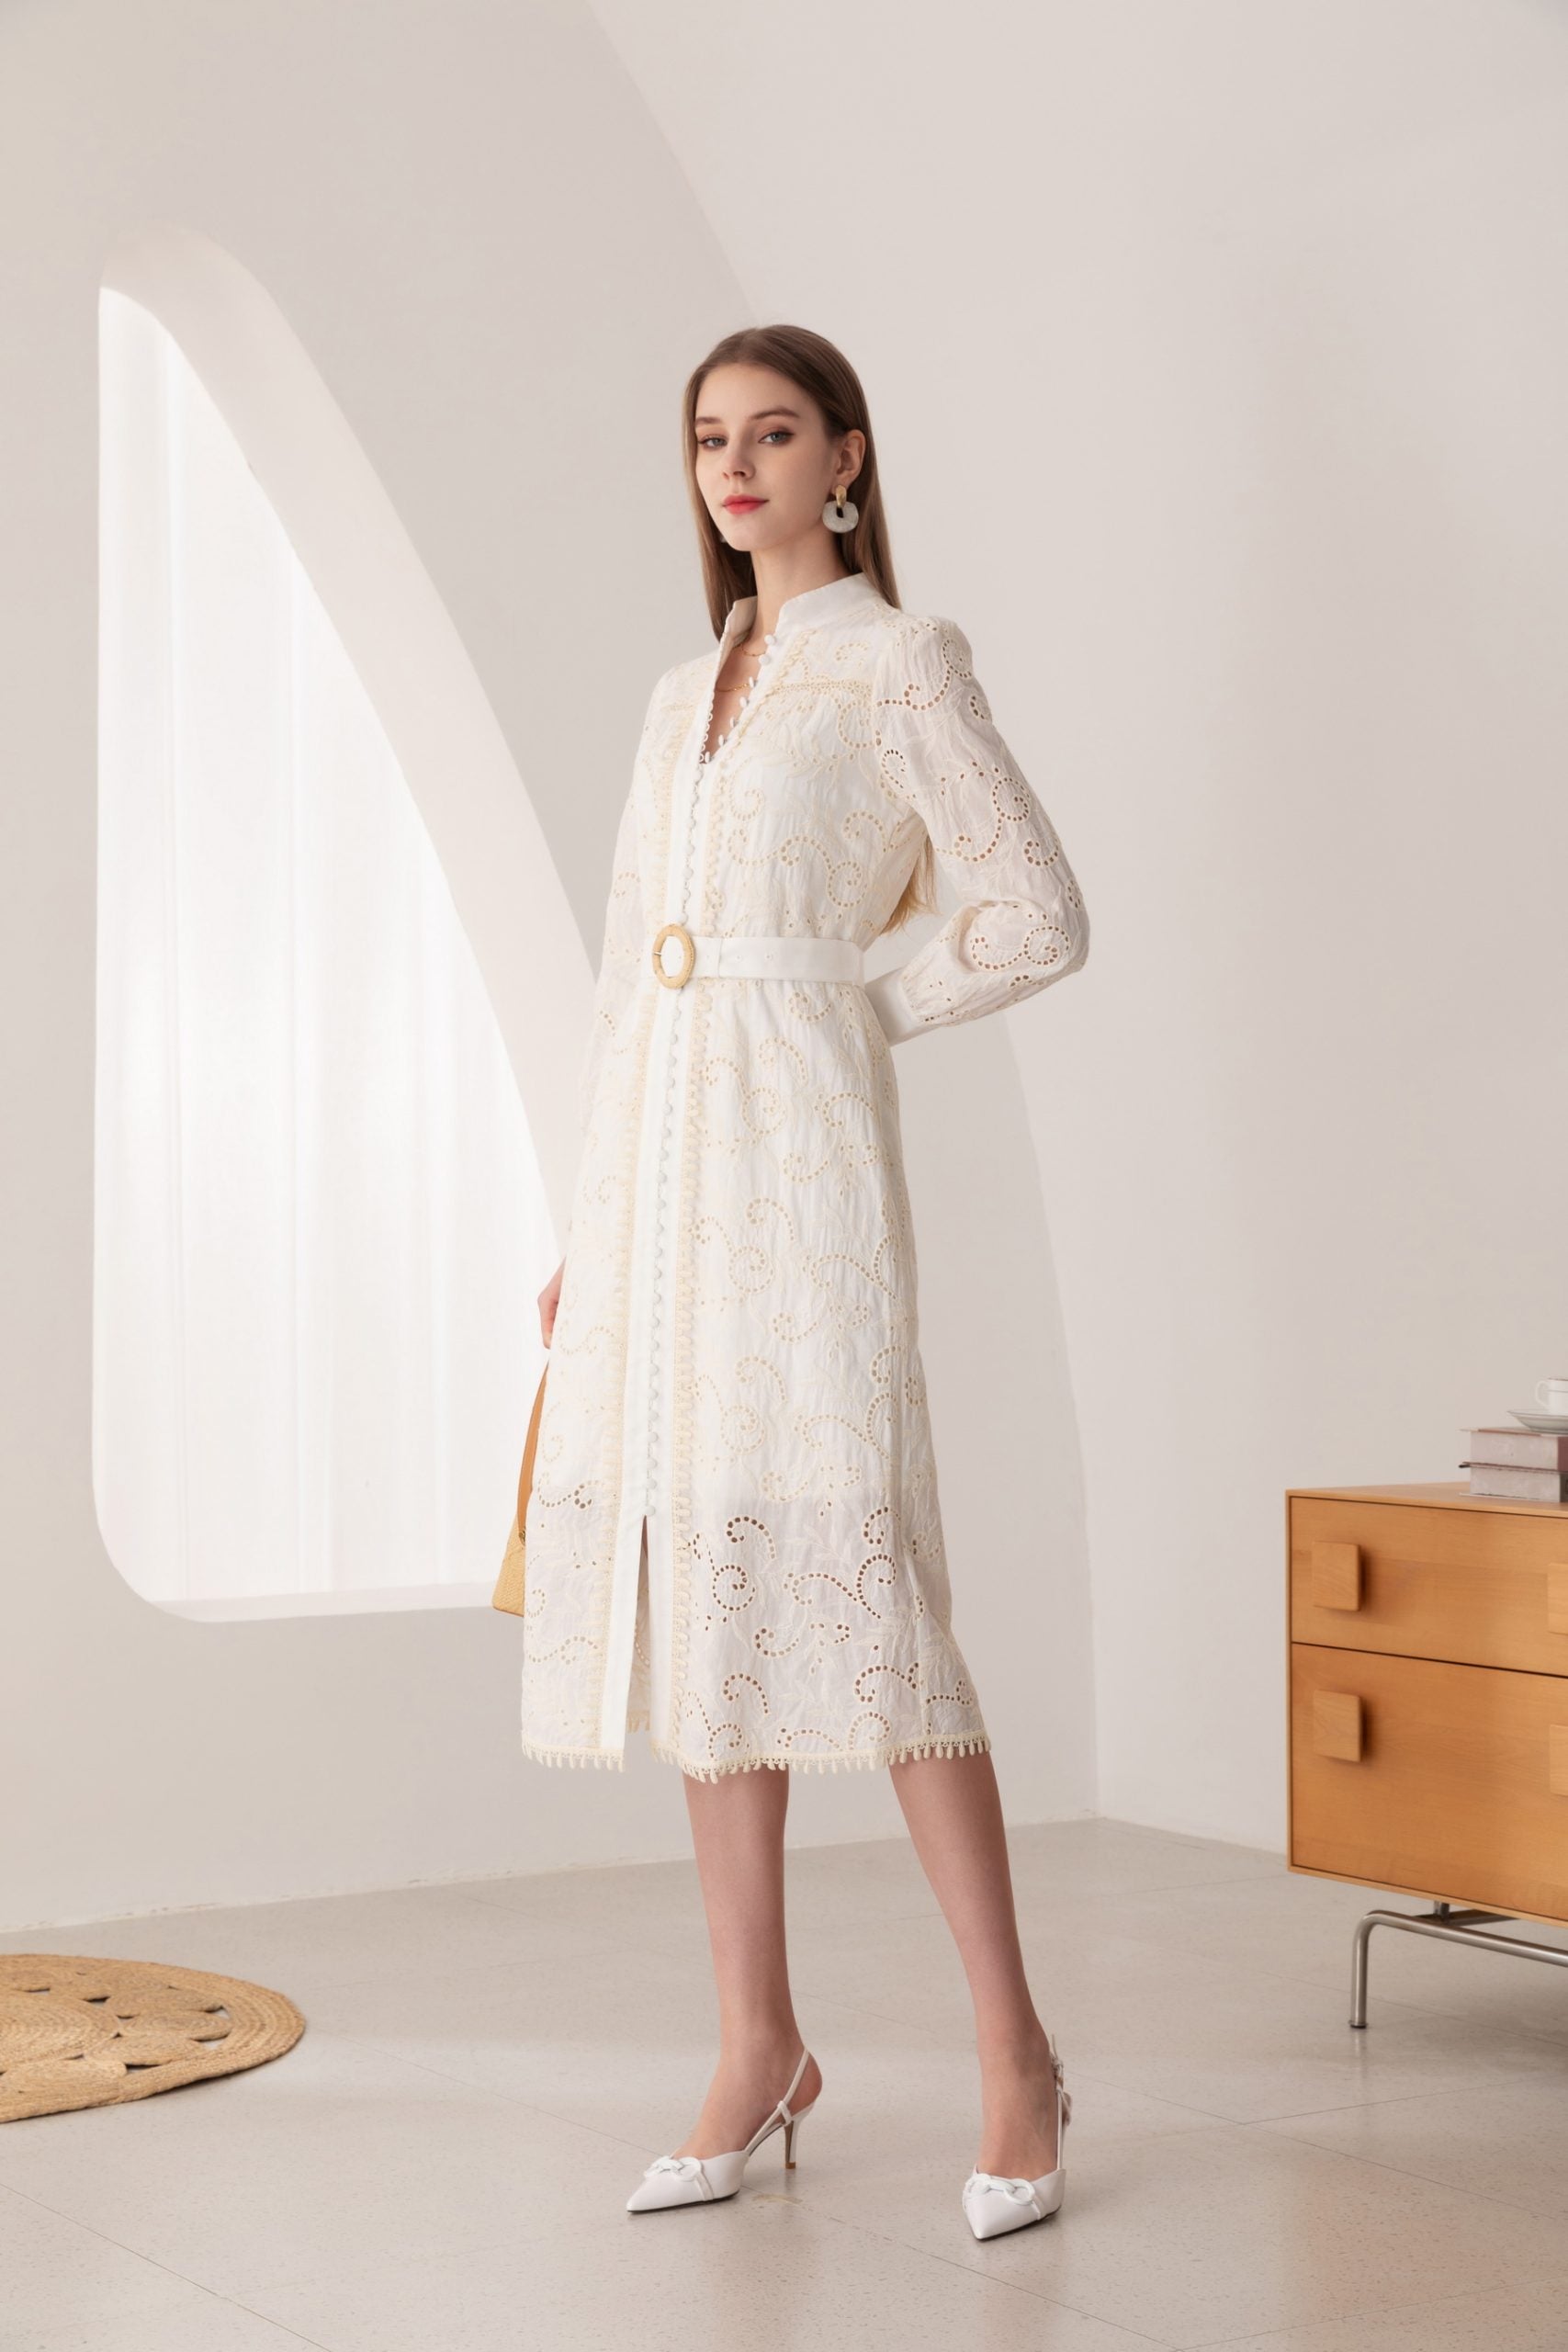 Turn heads in our Embroidered White Cotton Midi Dress. Effortless charm meets classic sophistication.